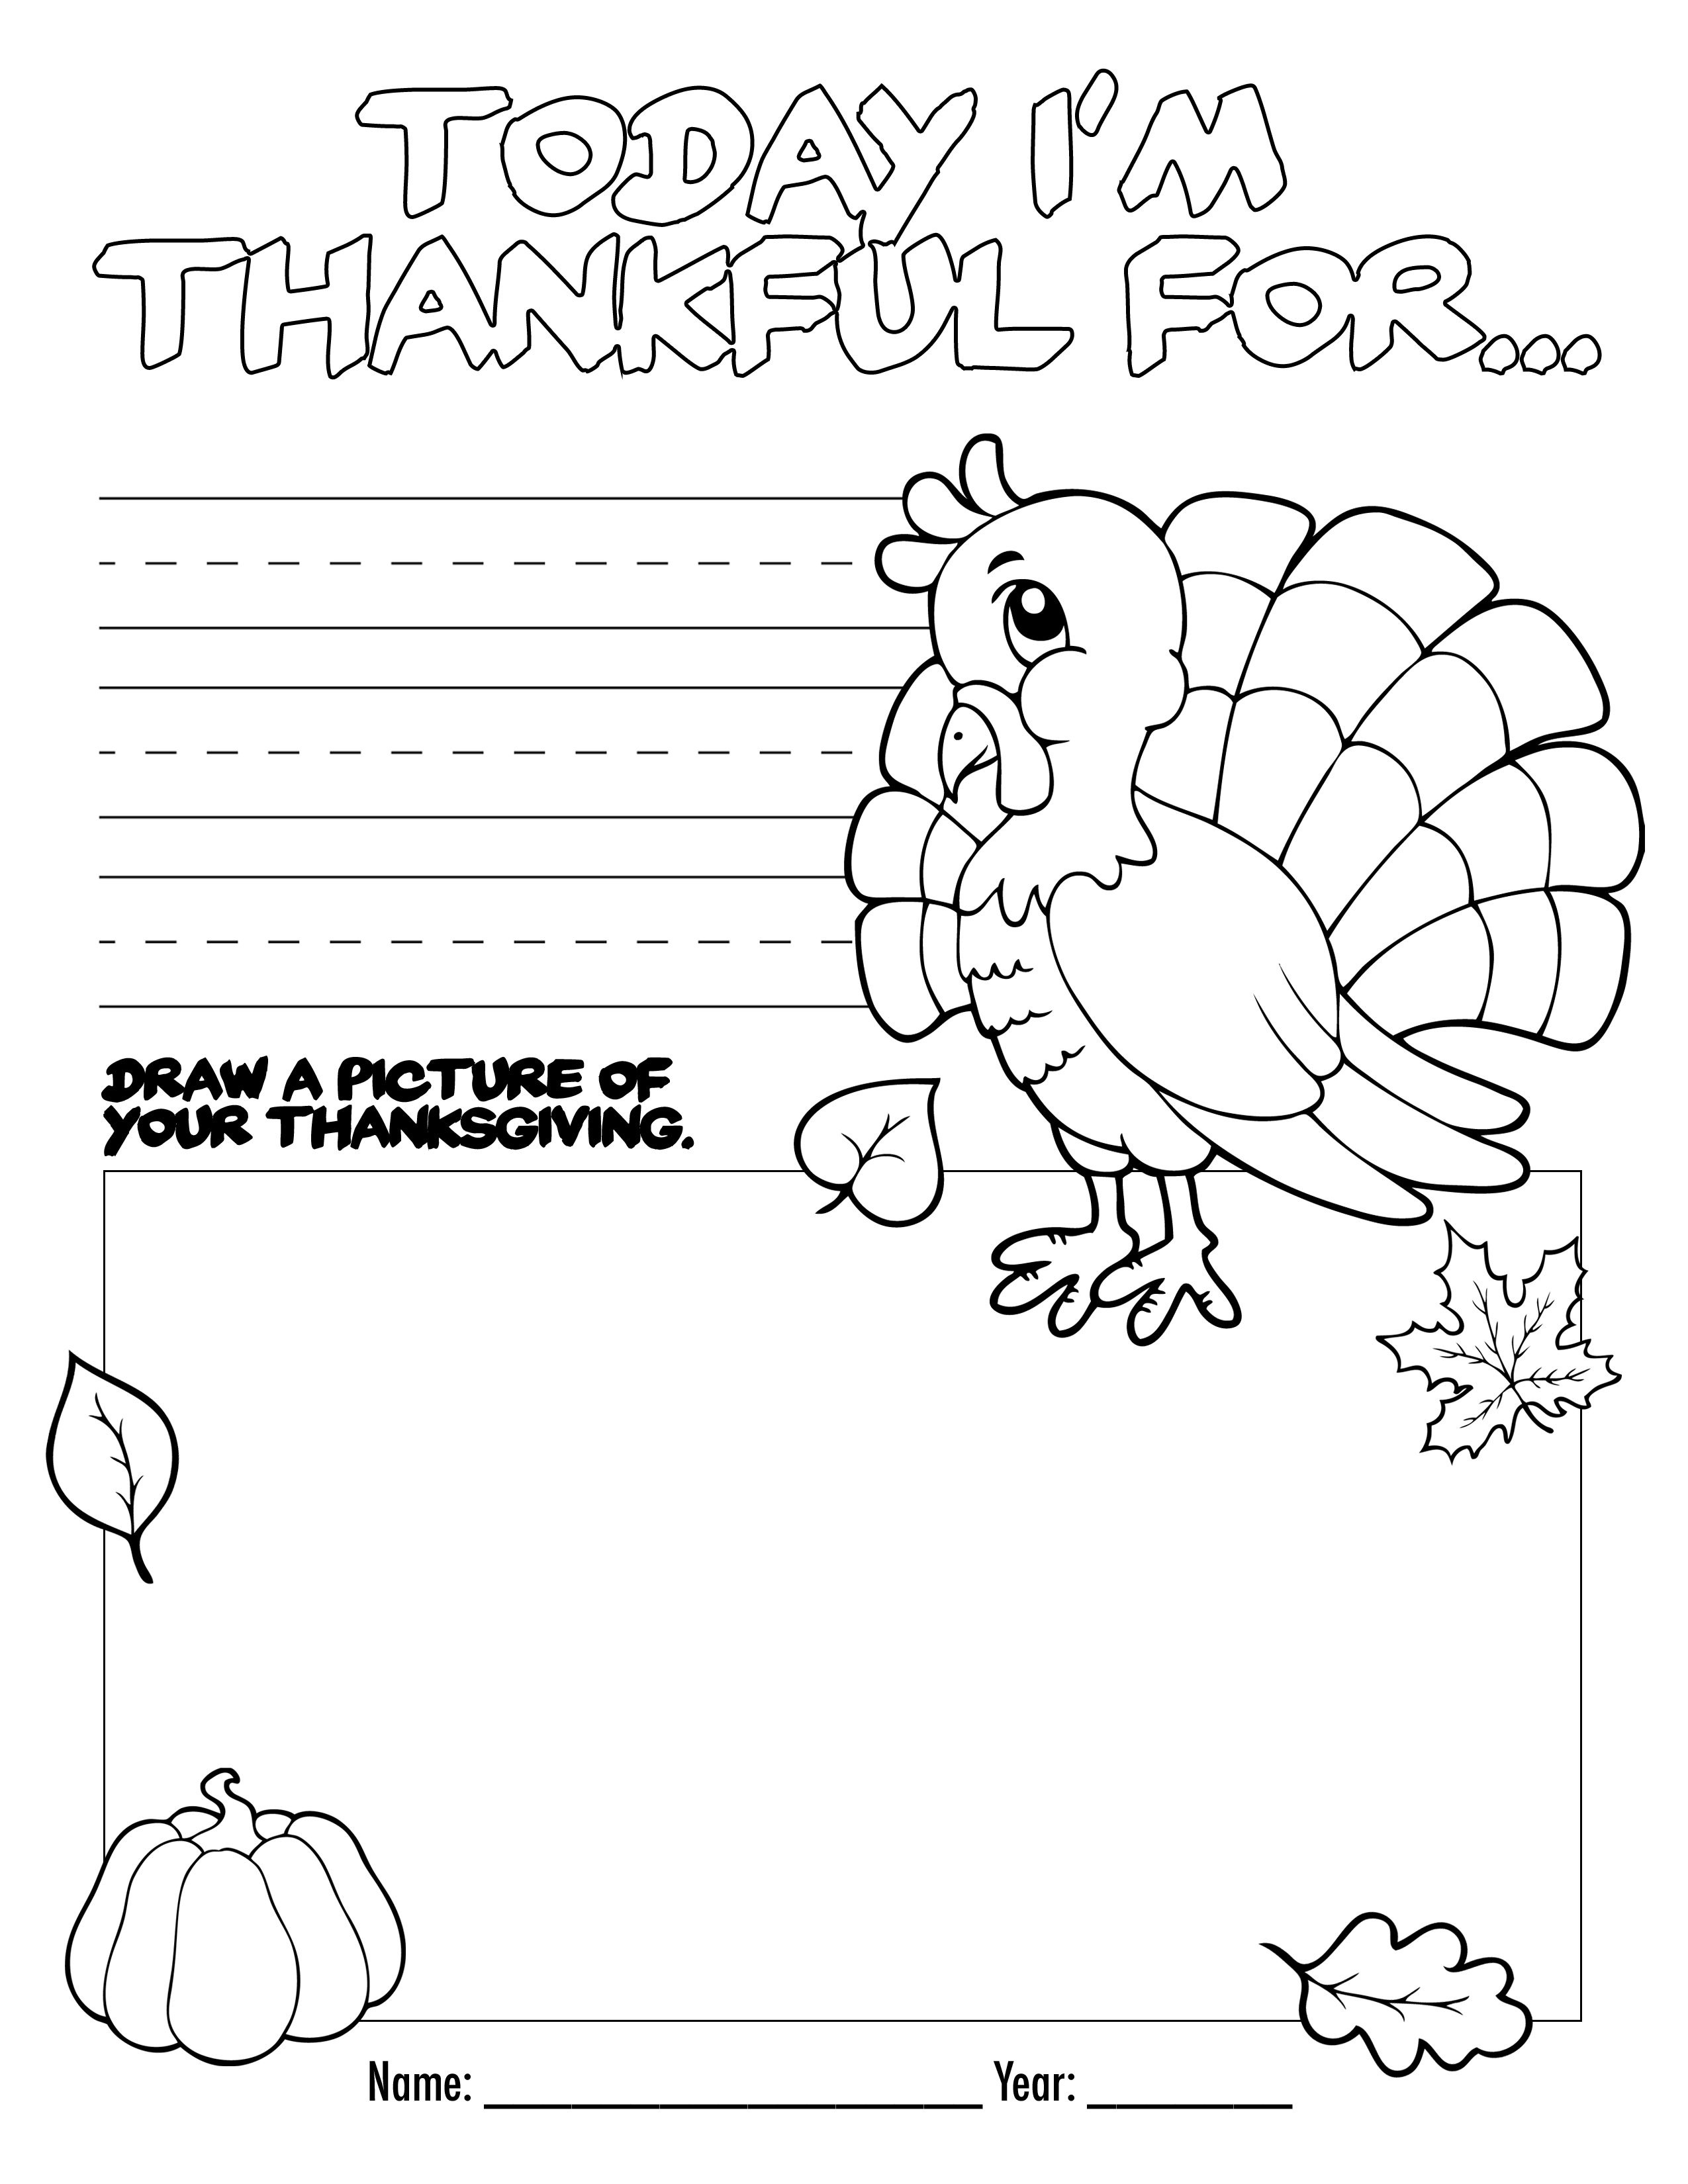 Thanksgiving Coloring Book Free Printable For The Kids! | Bloggers - Free Thanksgiving Mini Book Printable